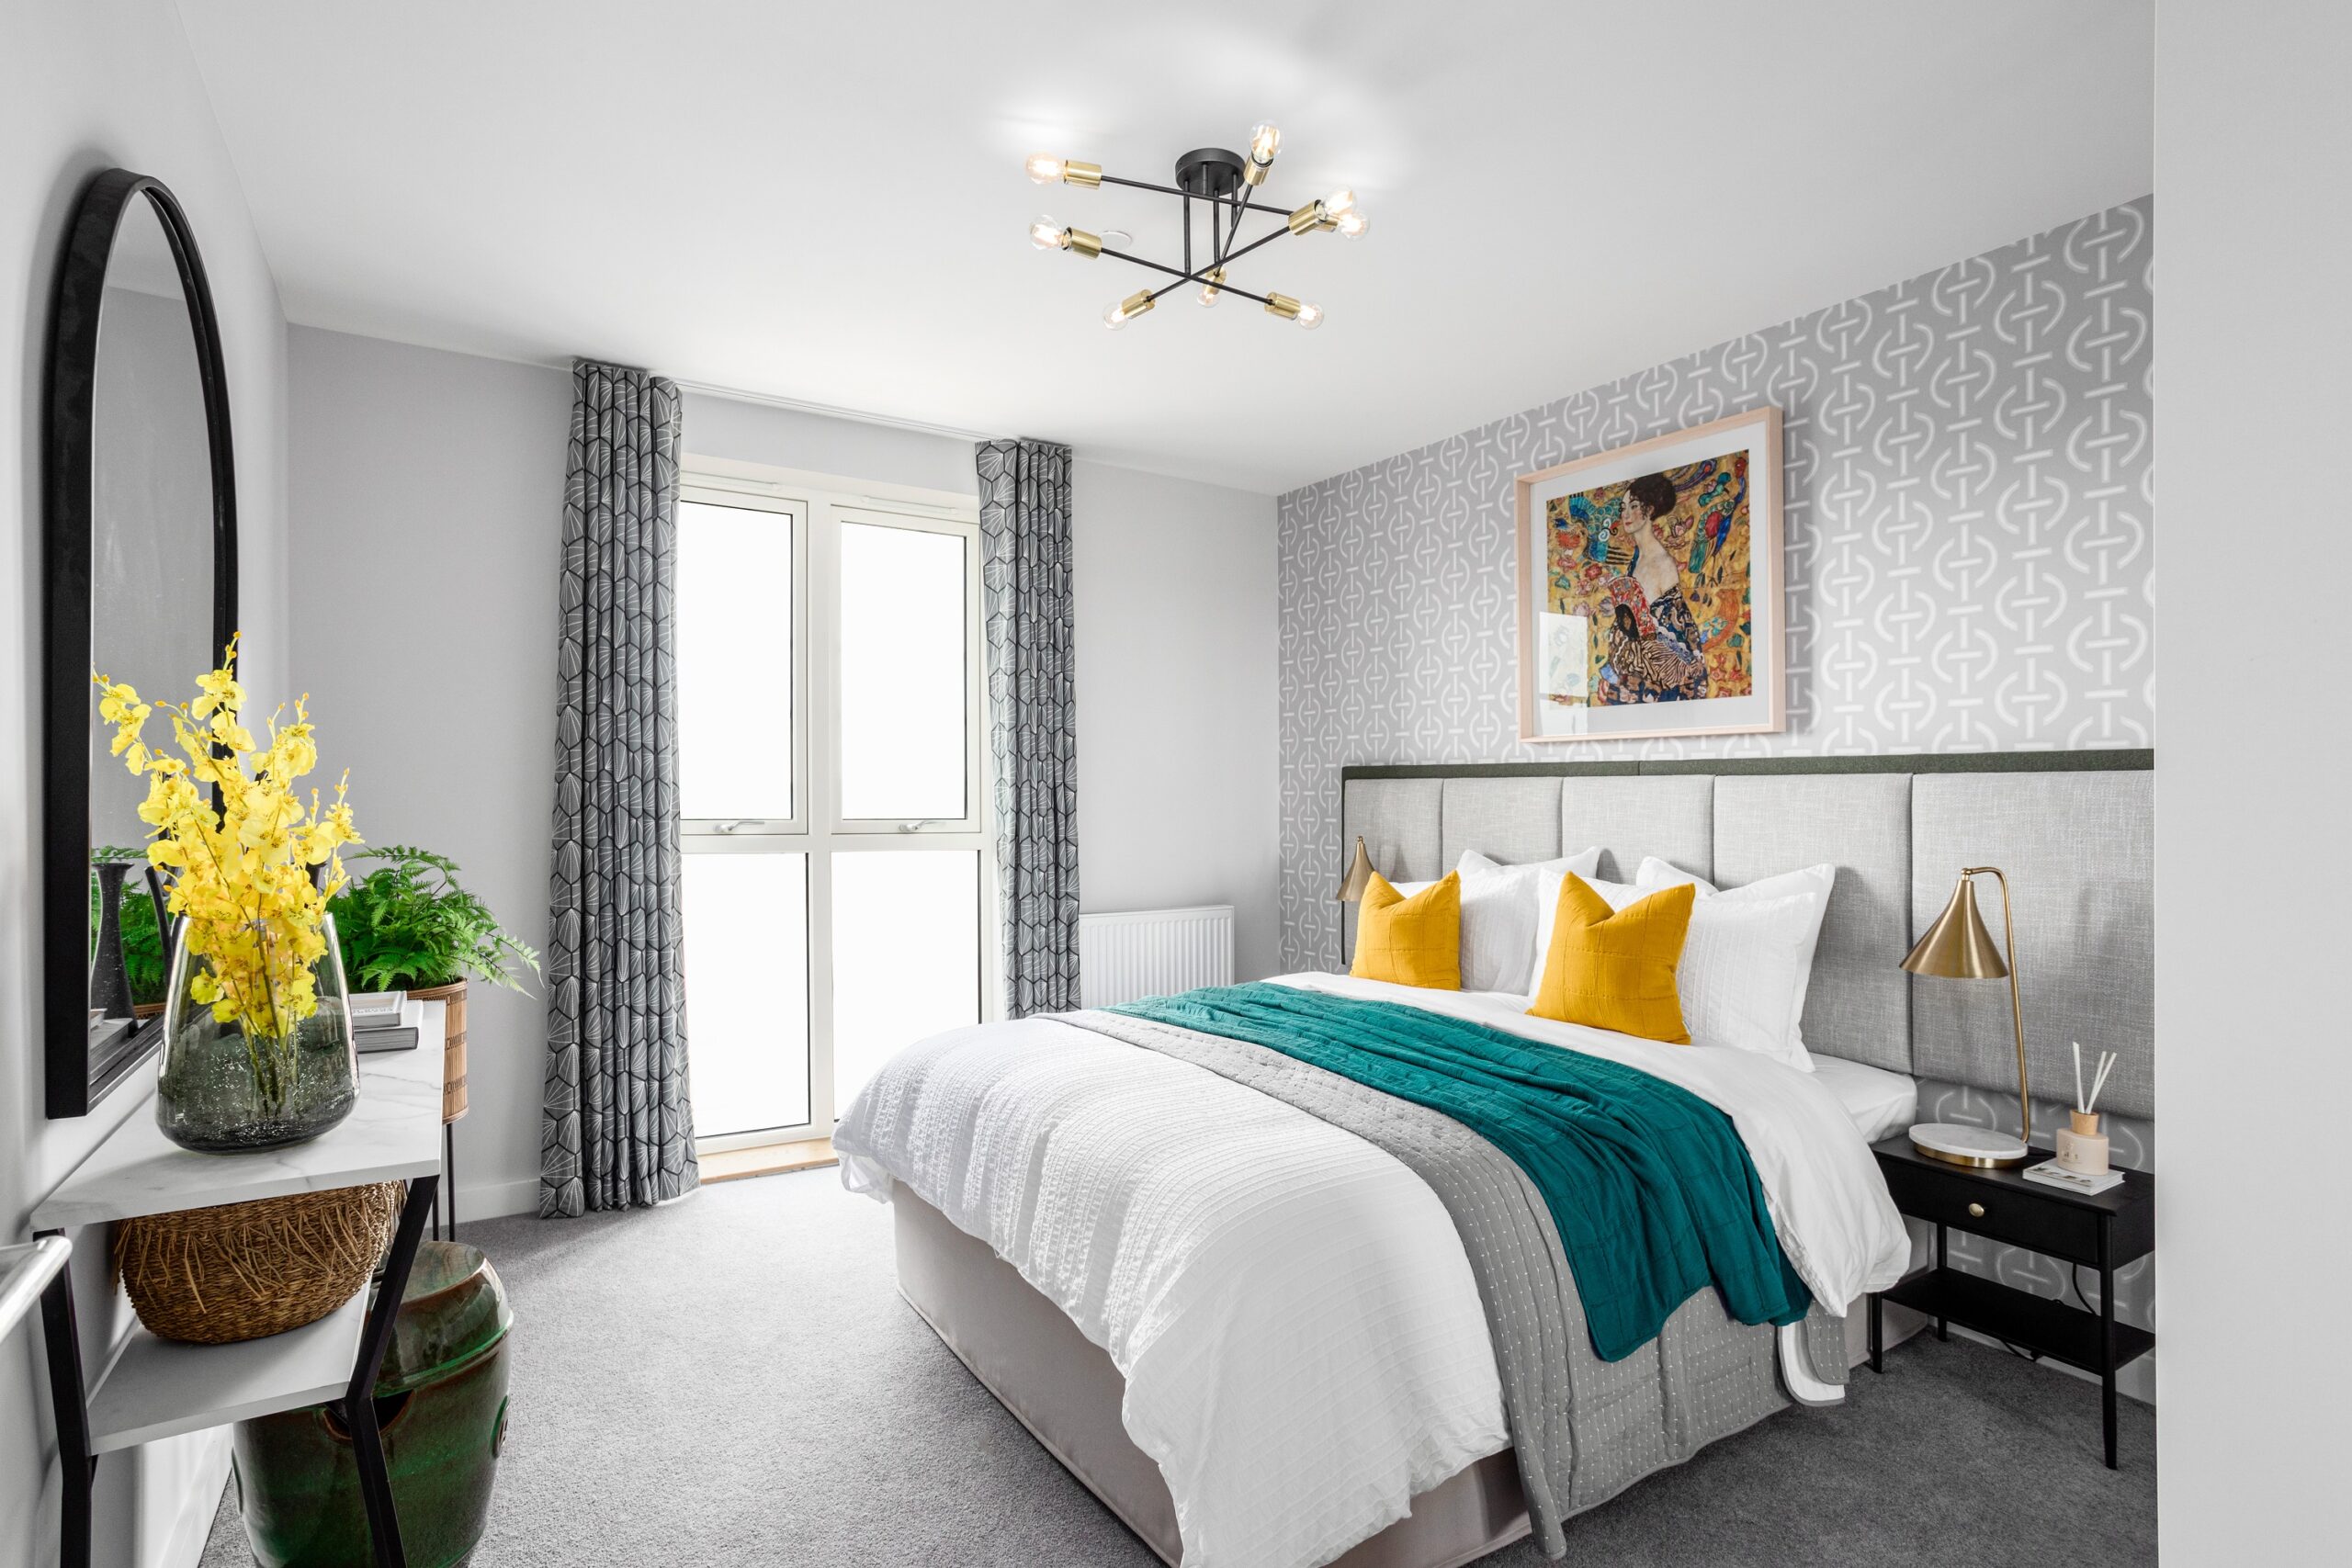 Internal photography of L&Q at Beam Park - Shared Ownership homes available on Share to Buy